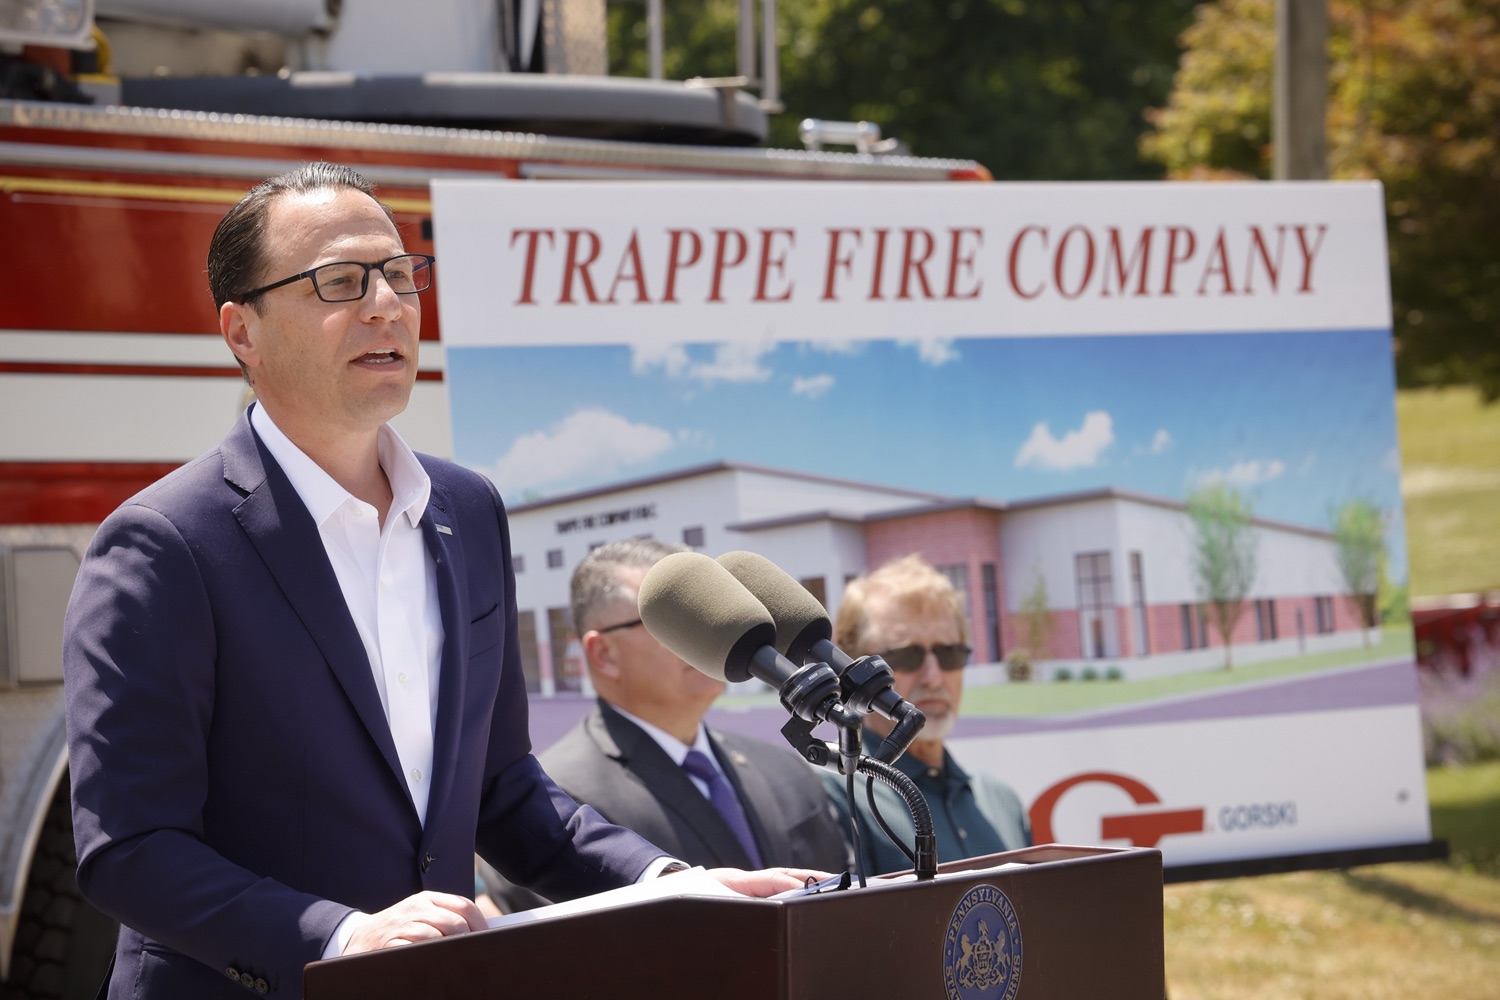 Pennsylvania Governor Josh Shapiro speaks with the press.   Governor Josh Shapiro delivered remarks at the Trappe Fire Company's new station groundbreaking in Montgomery County. The new fire station will be the first built in Trappe since 1911 to help the volunteer company continue to serve Trappe and Upper Providence townships with a new facility and updated resources. The new fire station is being built in honor of fallen Trooper Brandon Sisca, who was Fire Chief at Trappe Fire Company at the time of his passing. JUNE 04, 2023 - TRAPPE, PA<br><a href="https://filesource.amperwave.net/commonwealthofpa/photo/23197_gov_trappeFire_dz_010.JPG" target="_blank">⇣ Download Photo</a>